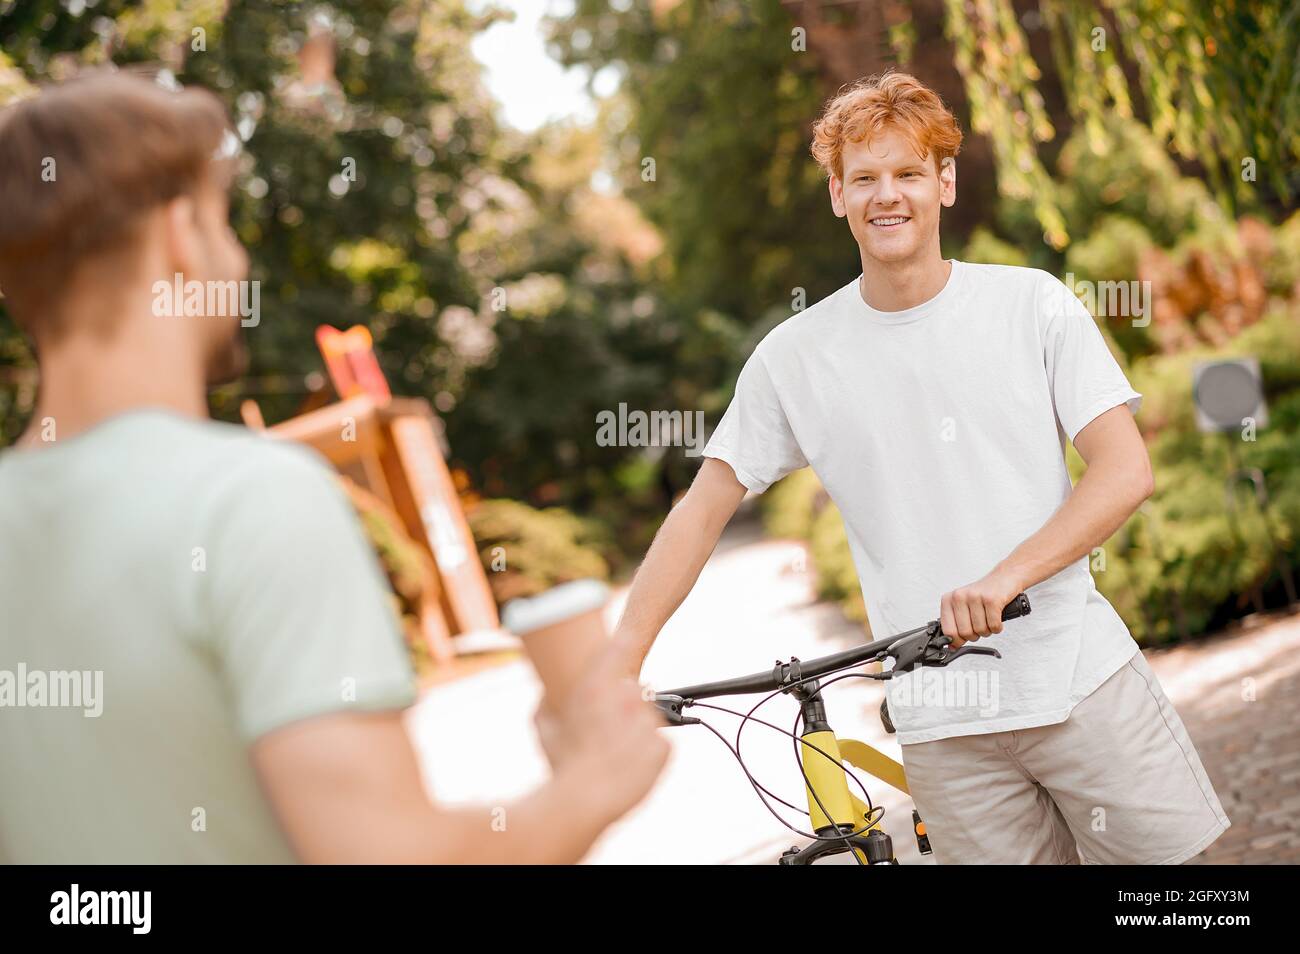 Contented young bicyclist conversing with his pal Stock Photo